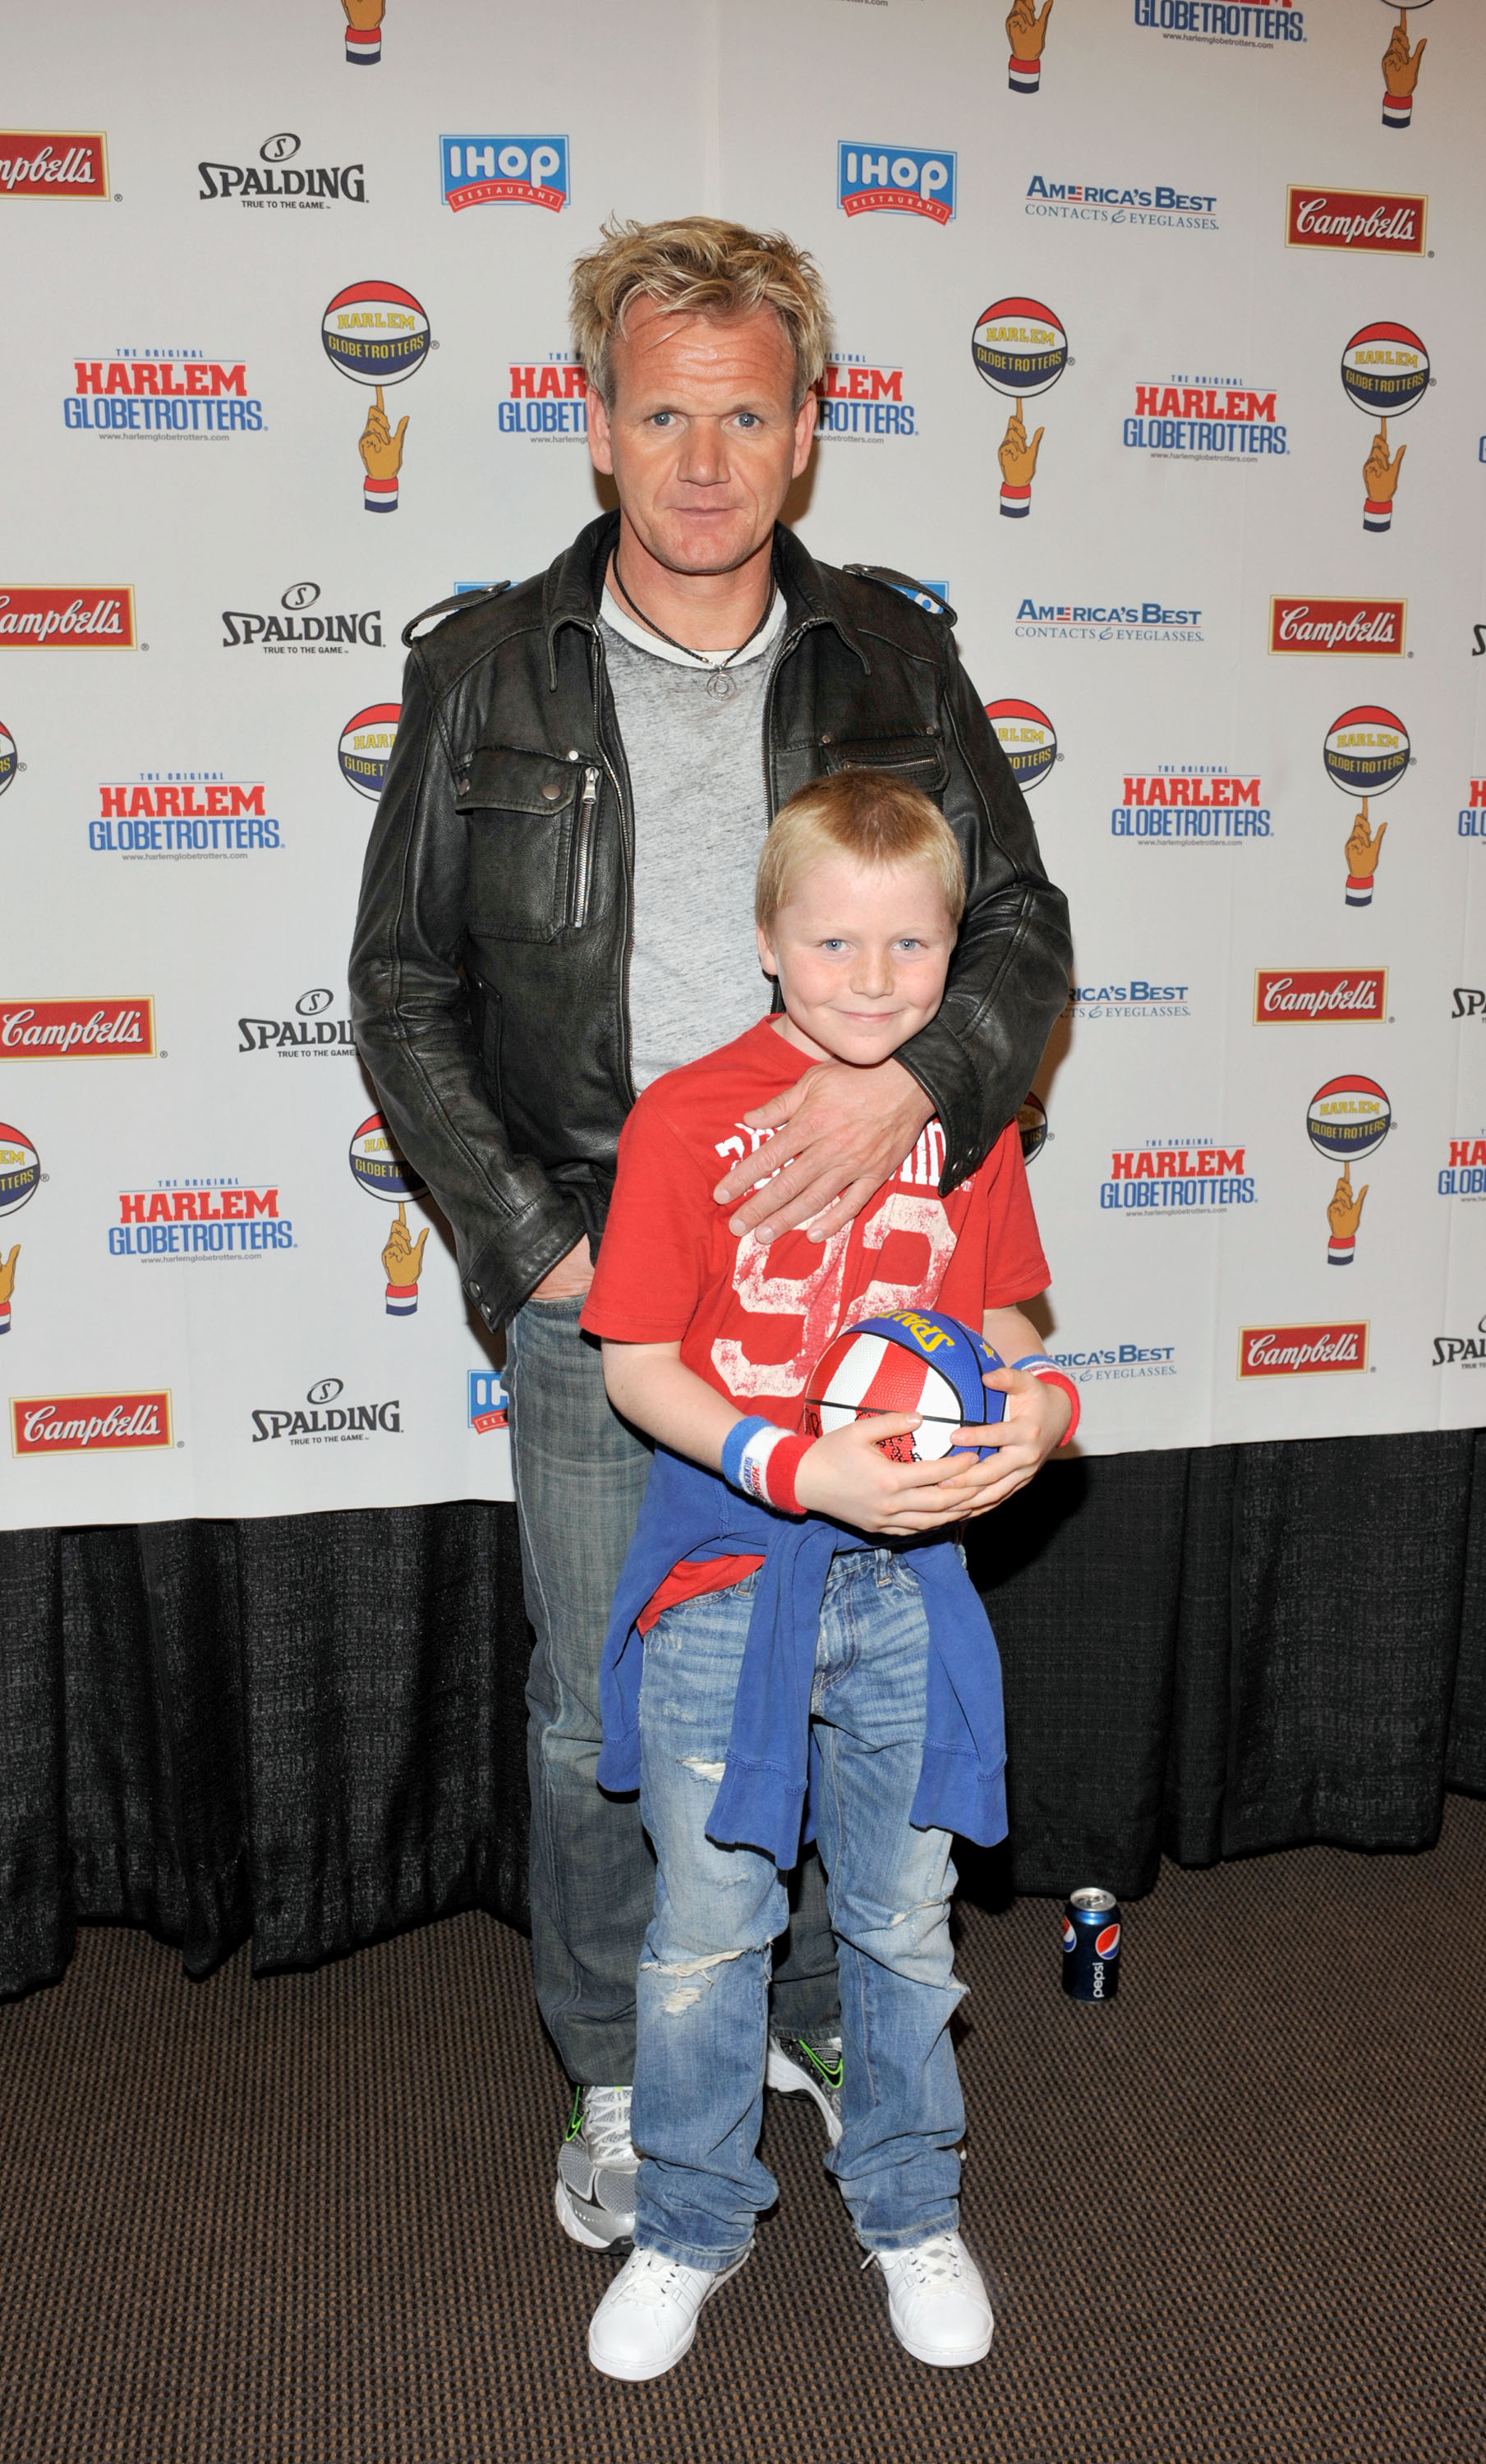 Gordon Ramsay and Jack Scott Ramsay at the Harlem Globetrotters 2009 "Spinning The Globe " World Tour on February 15, 2009, in Los Angeles, California. | Source: Getty Images